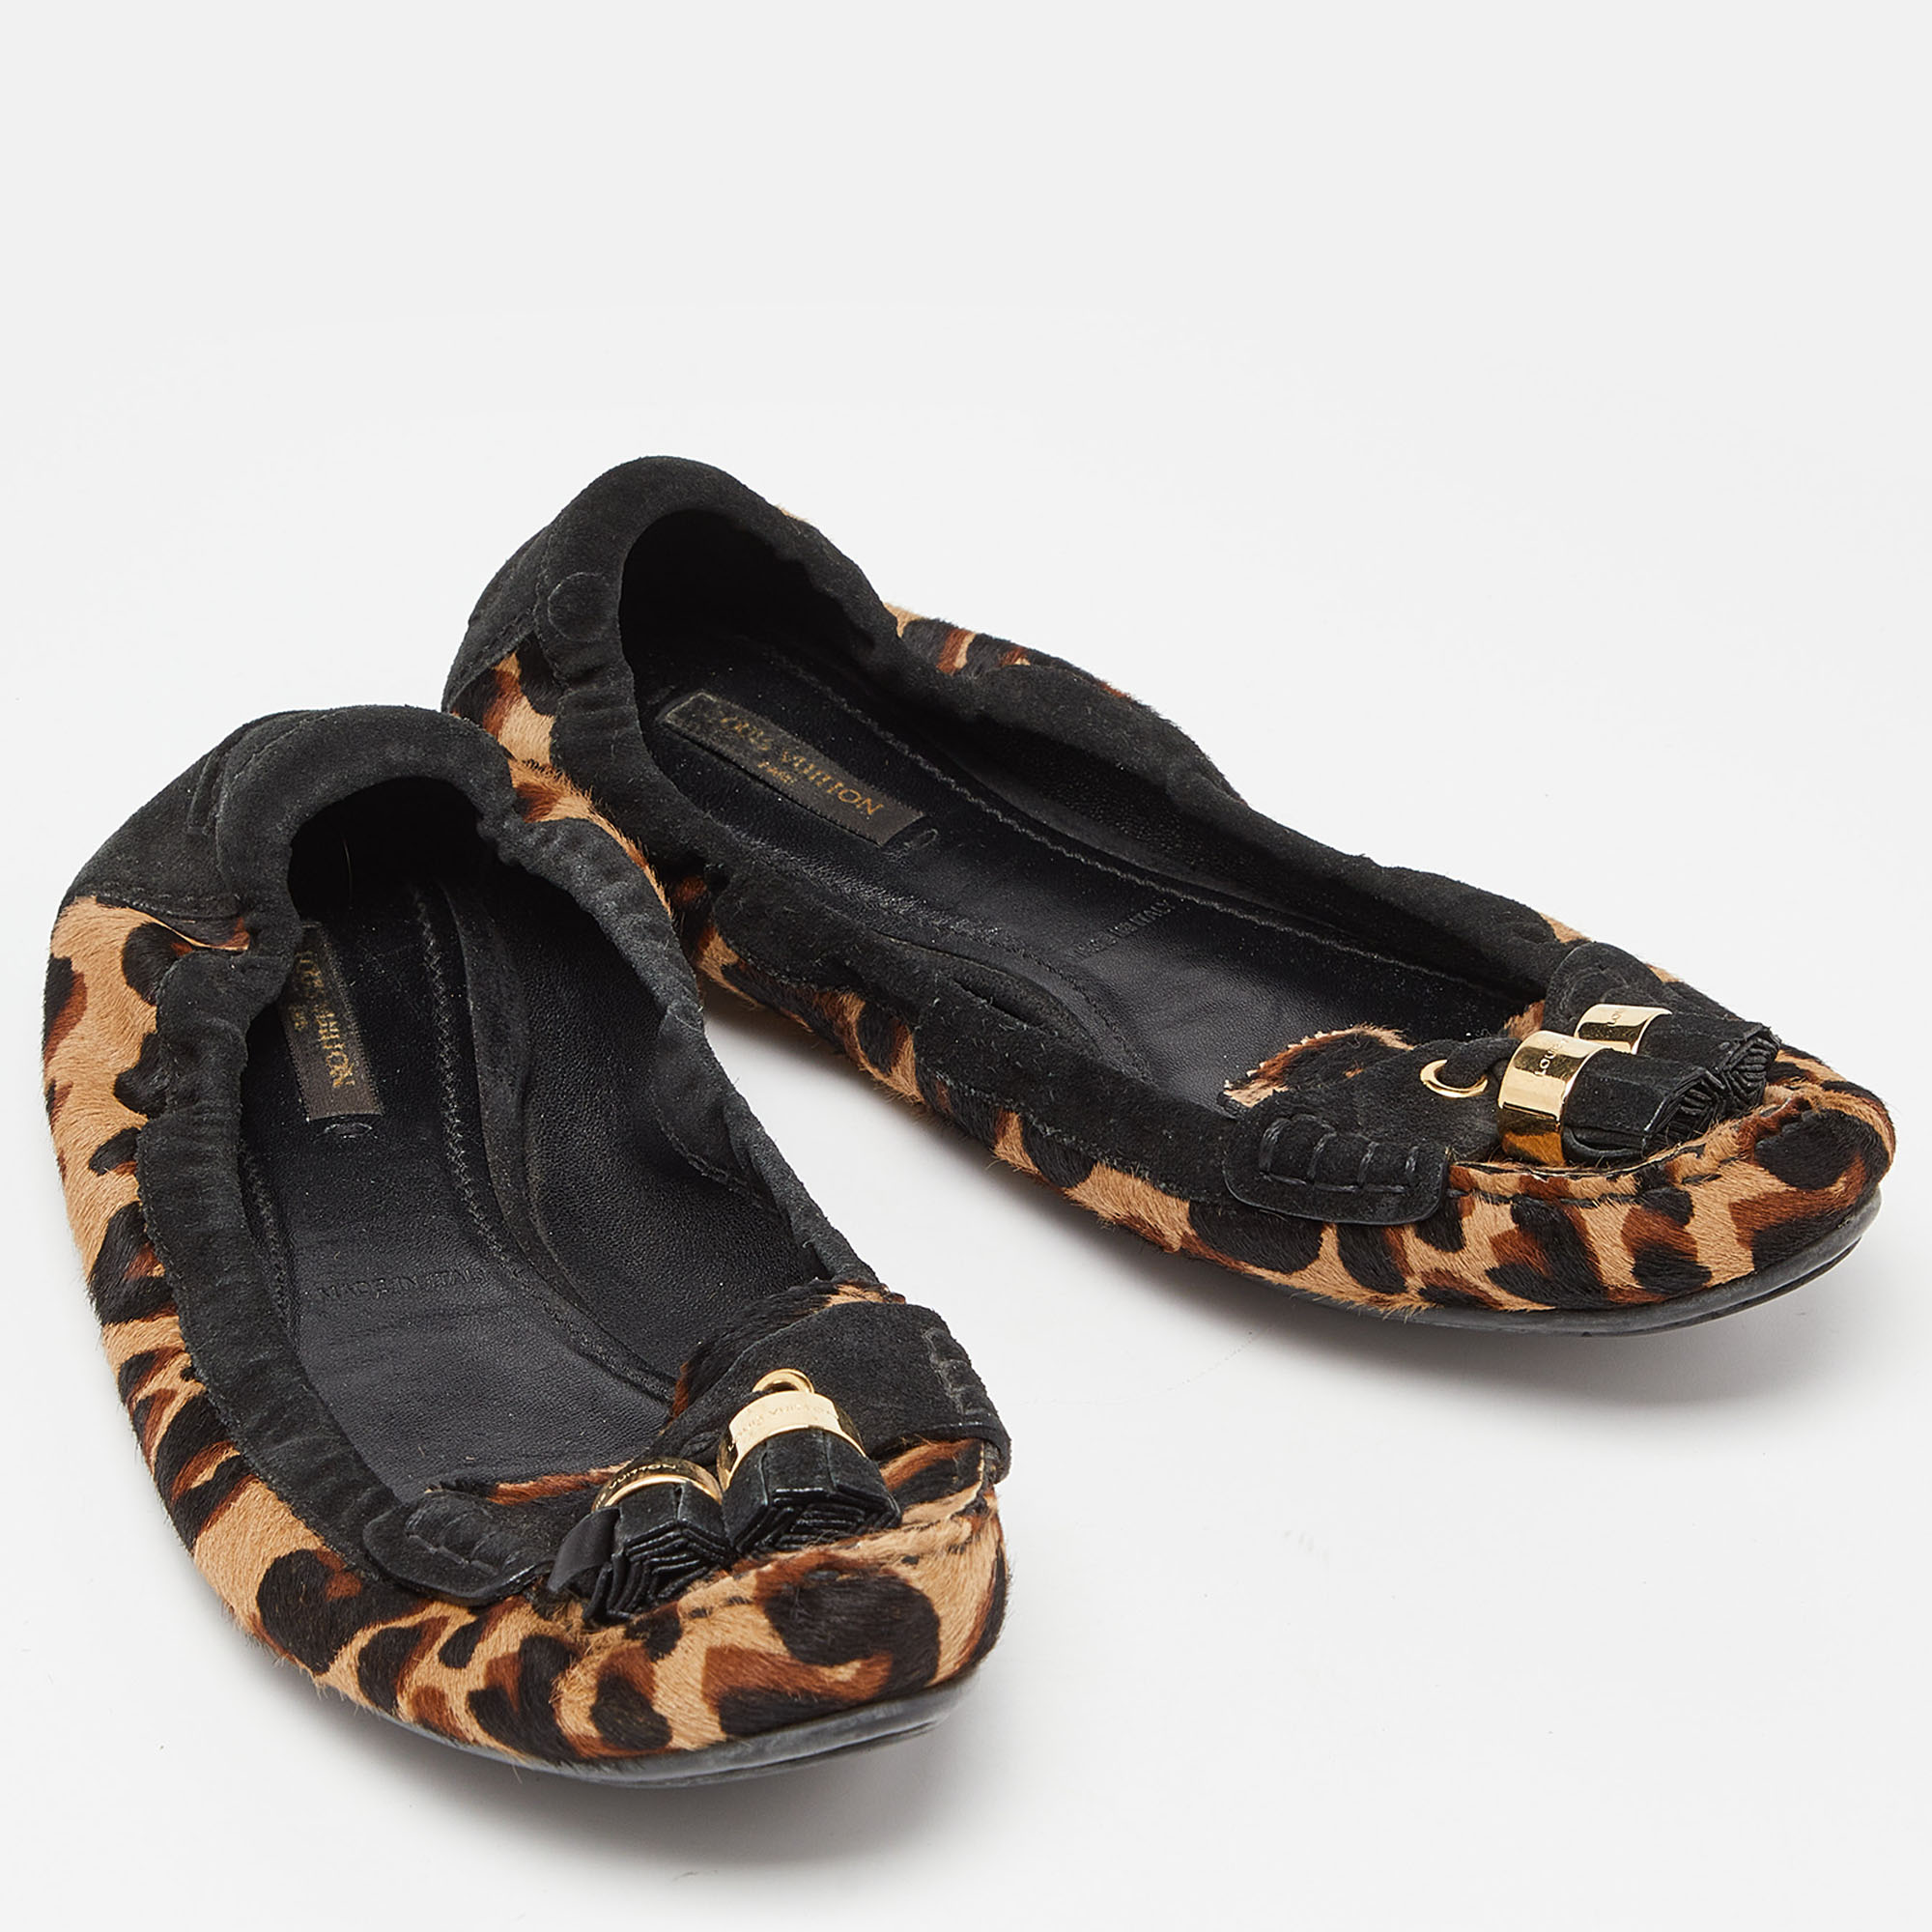 Louis Vuitton Tricolor Leopard Print Calf Hair And Suede Tassel Scrunch Loafers Size 40